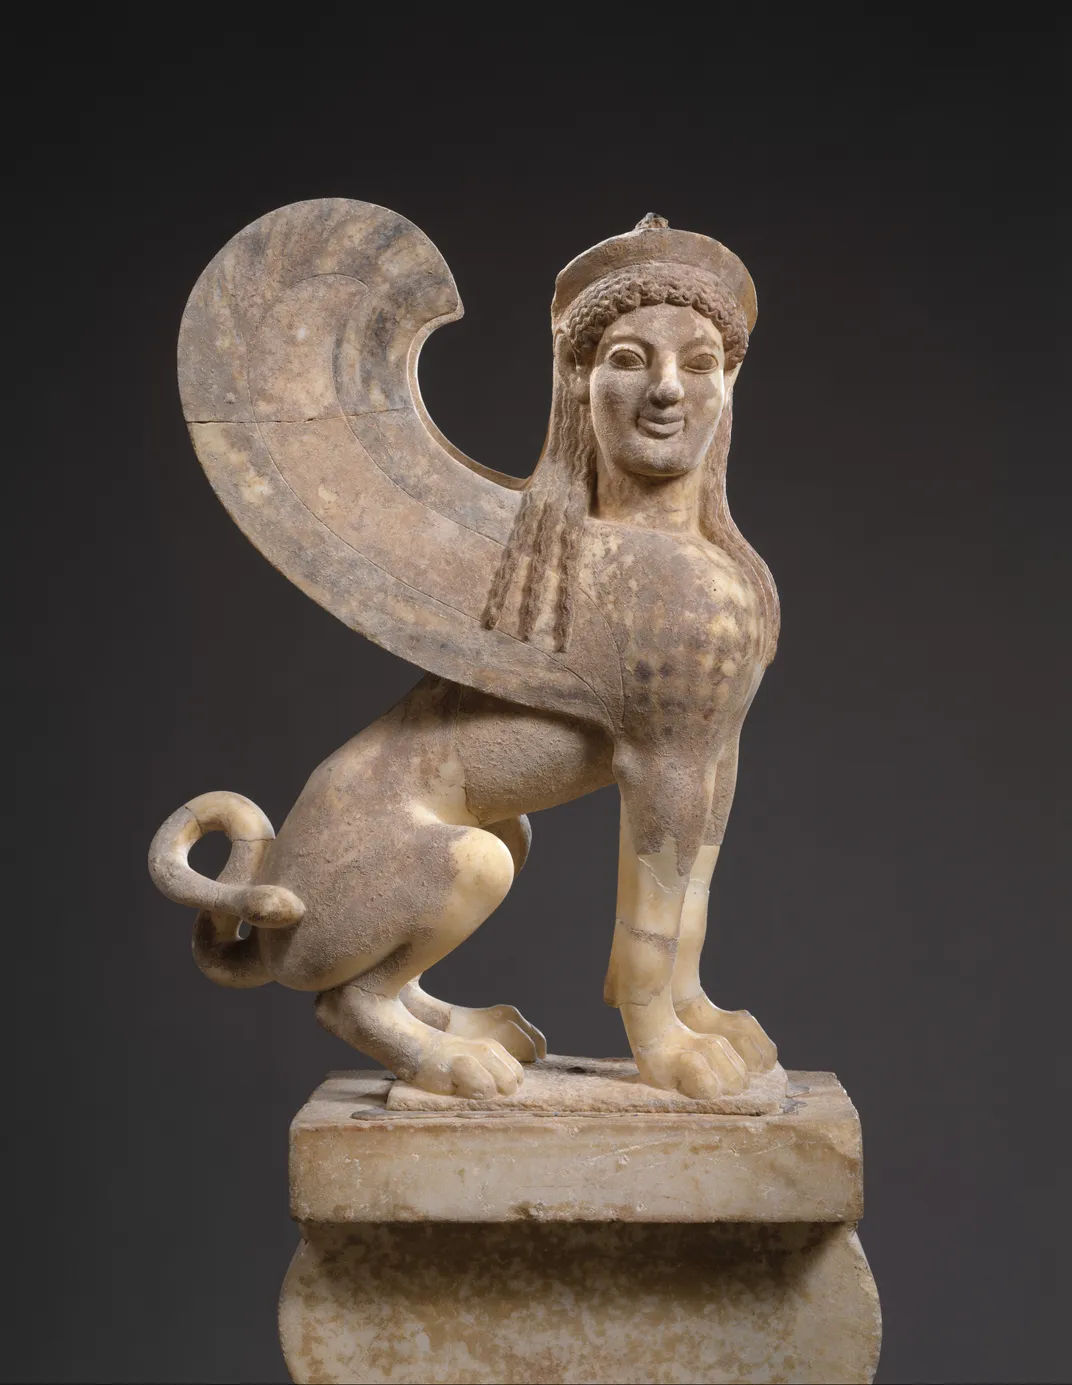 The original marble capital and finial in the form of a sphinx, circa 530 B.C.E.